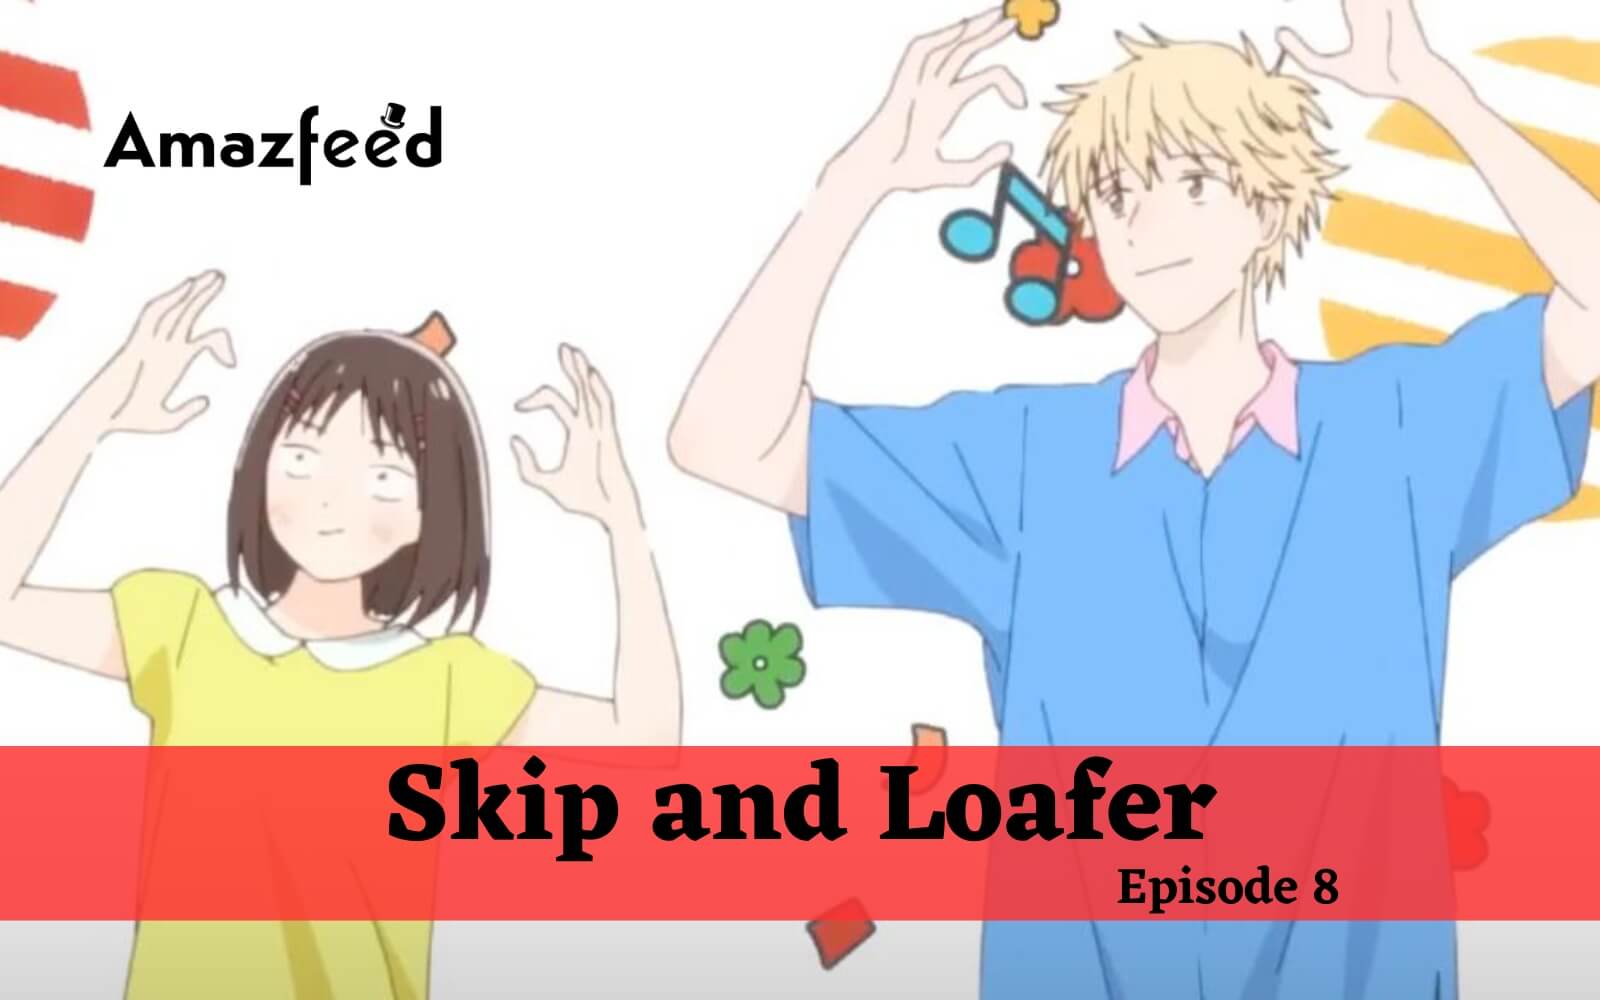 Skip and Loafer Vol. 8